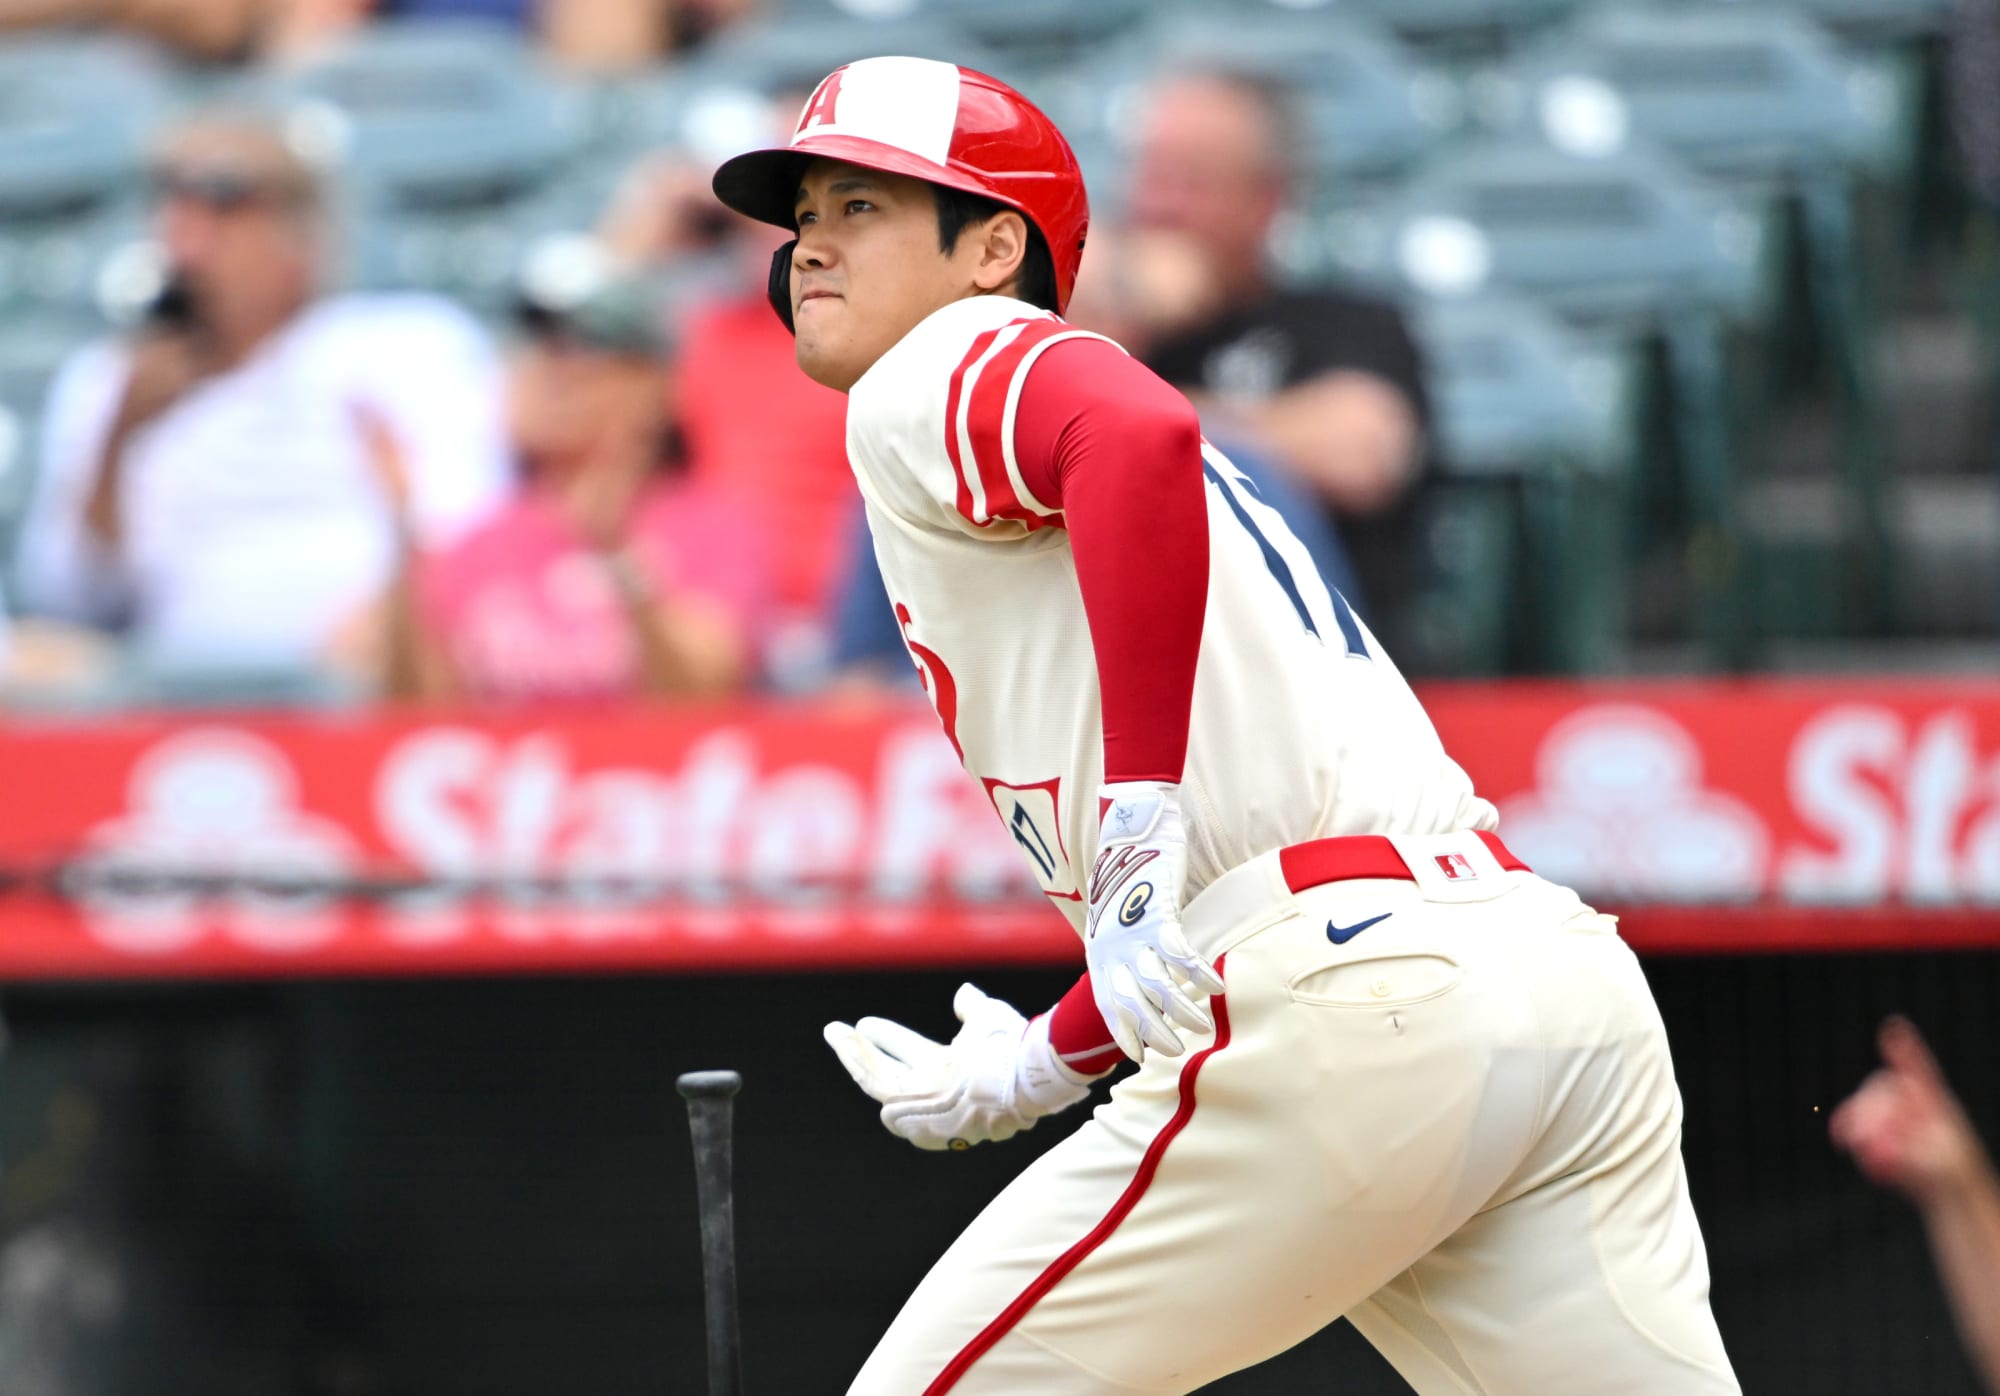 Shohei Ohtani Are the Los Angeles Dodgers the frontrunners?